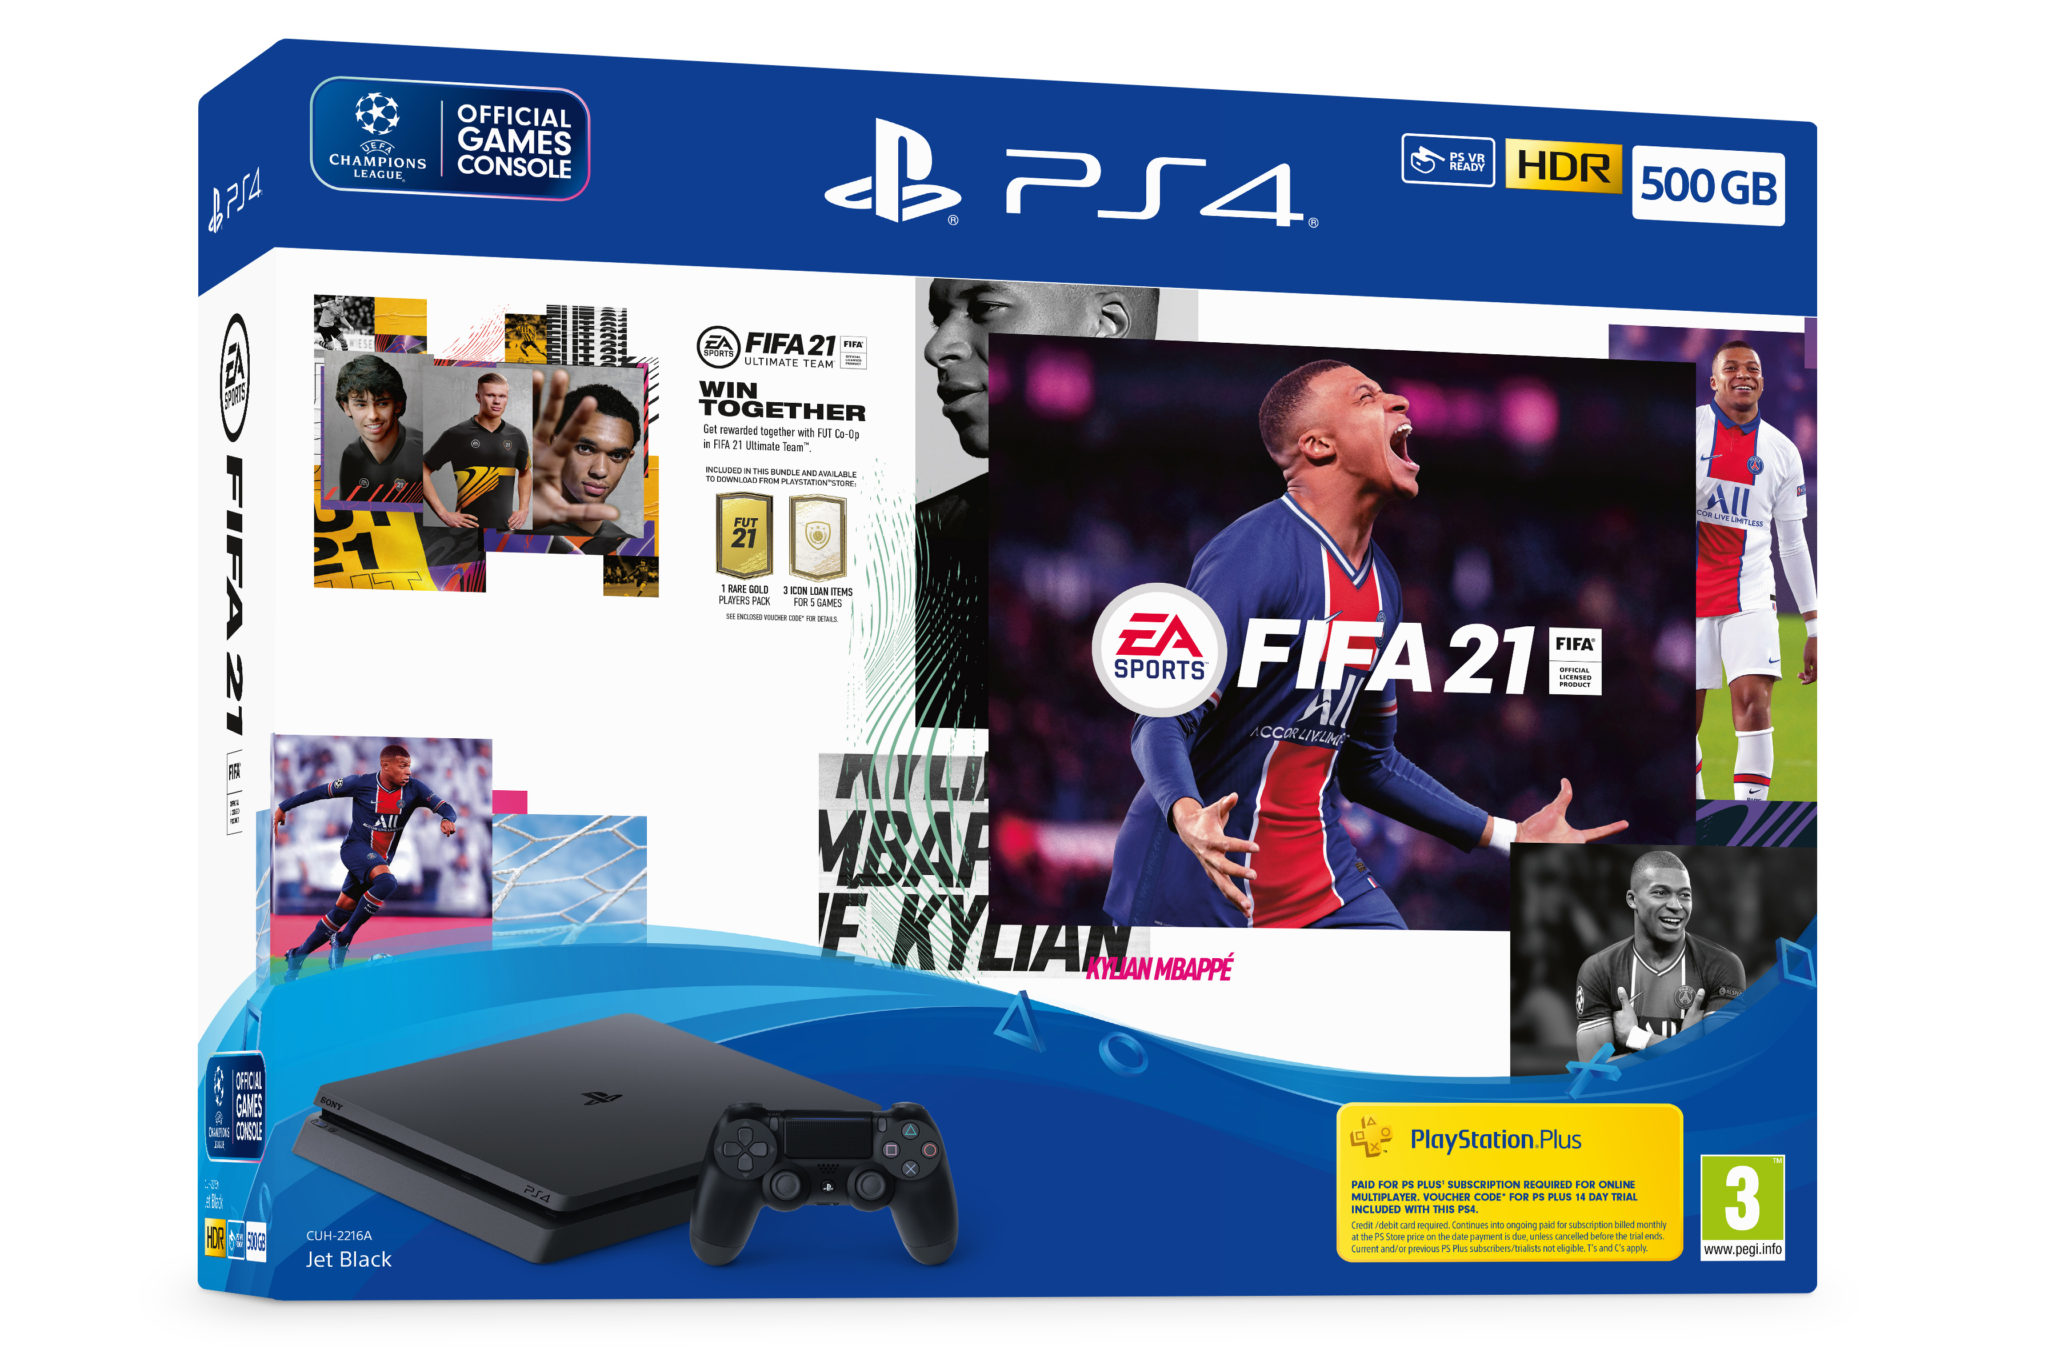 Lace up for FIFA 21 with range of new PS4 hardware bundles coming this fall – duncannagle.com